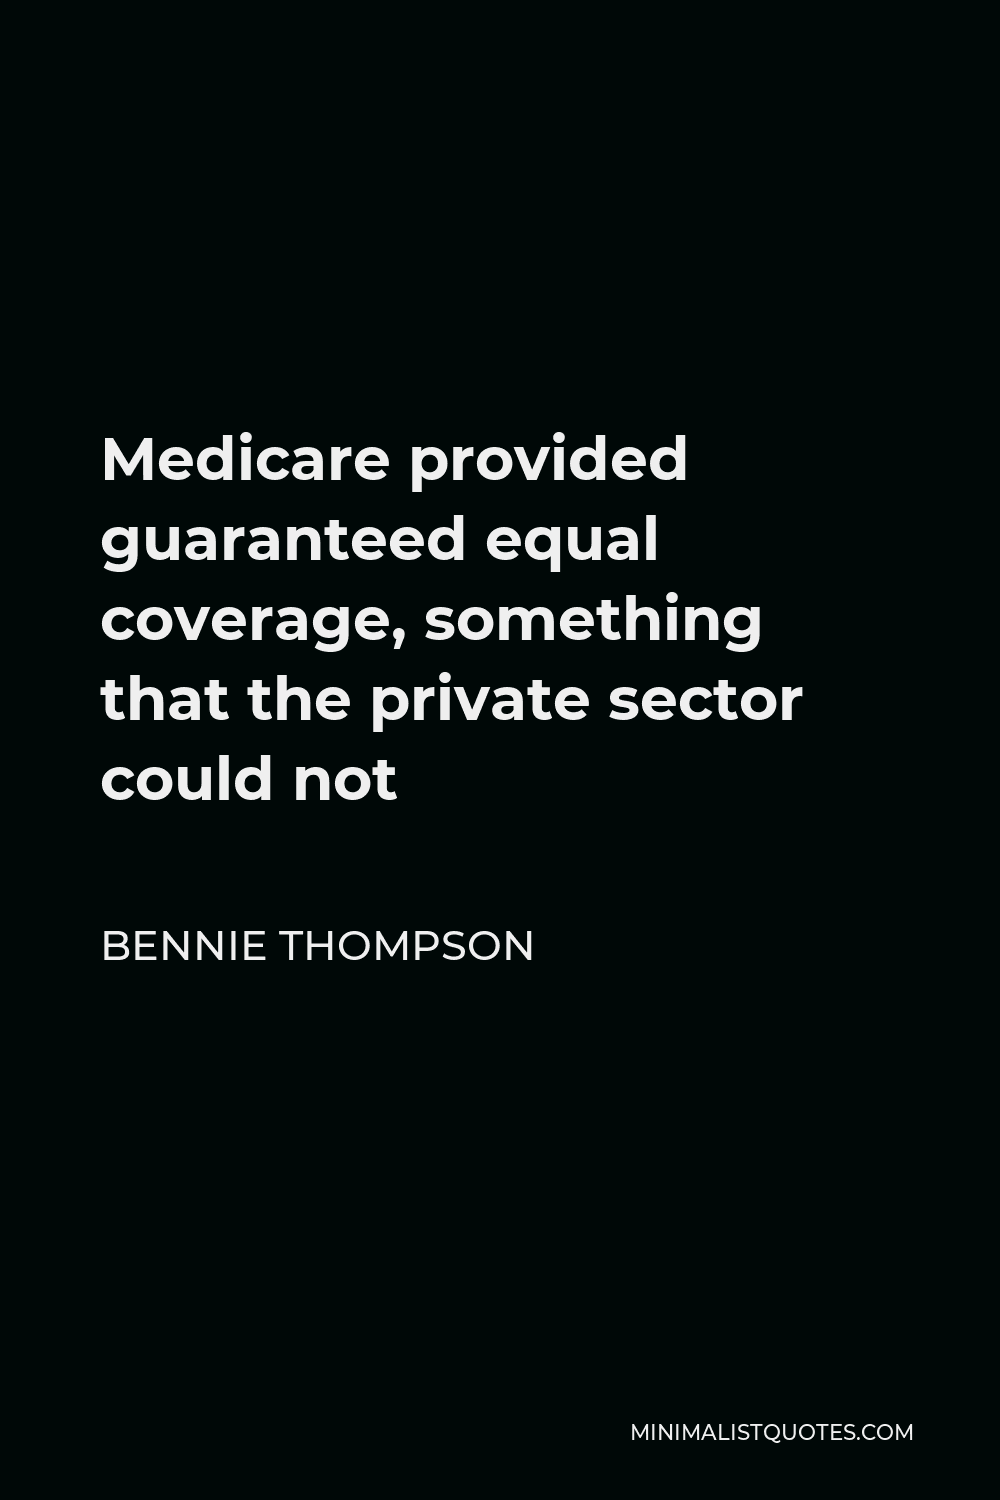 Bennie Thompson Quote - Medicare provided guaranteed equal coverage, something that the private sector could not